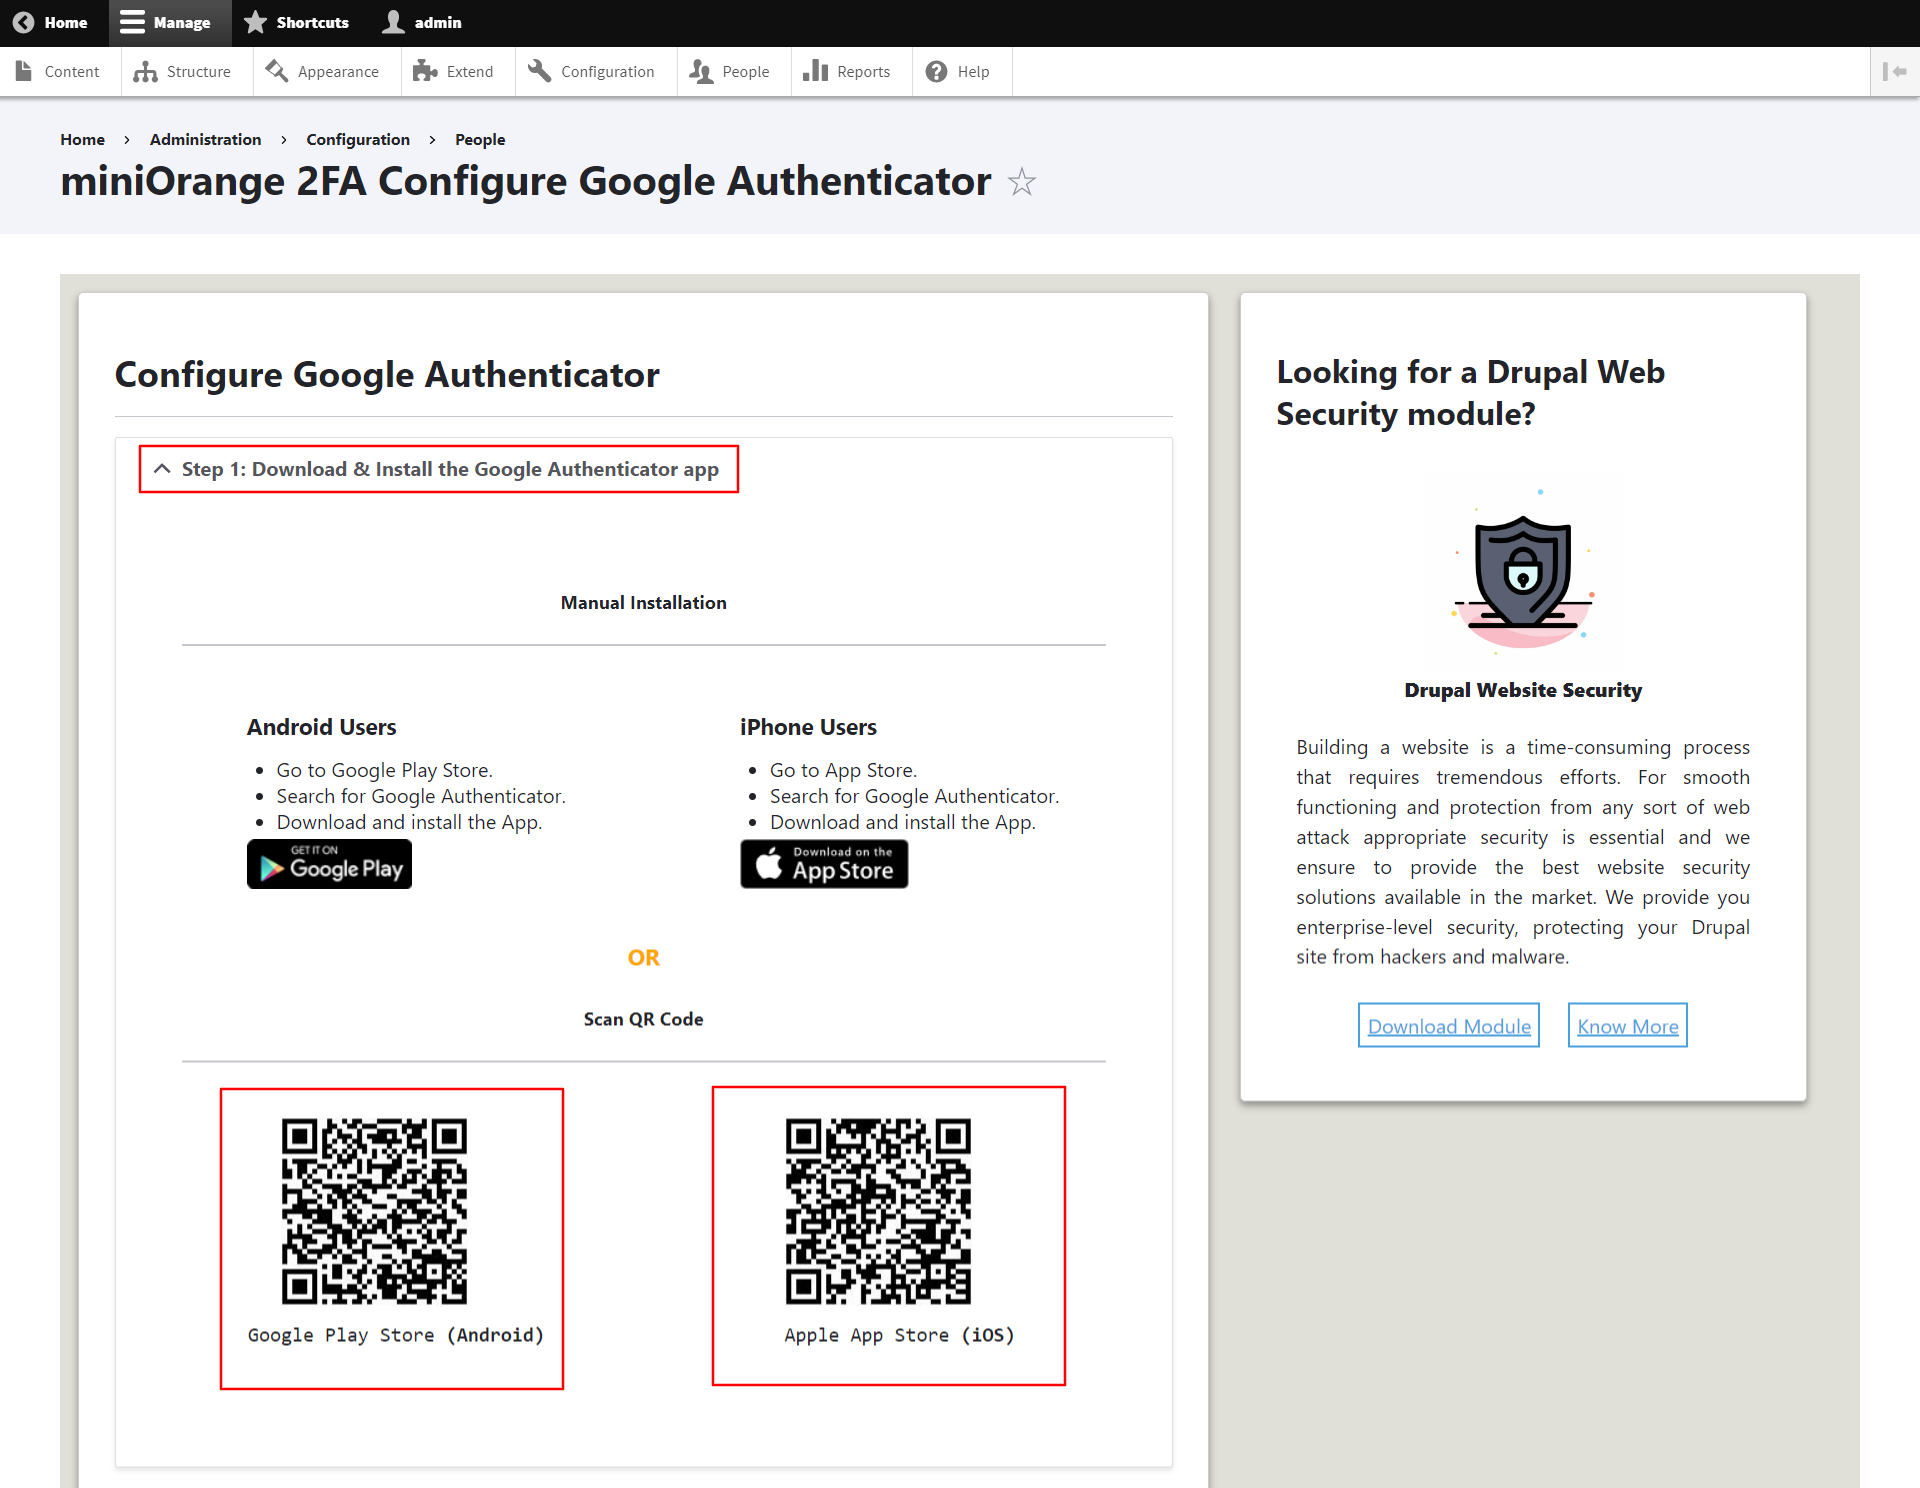 Drupal 2FA Download and install Google Authenticator App